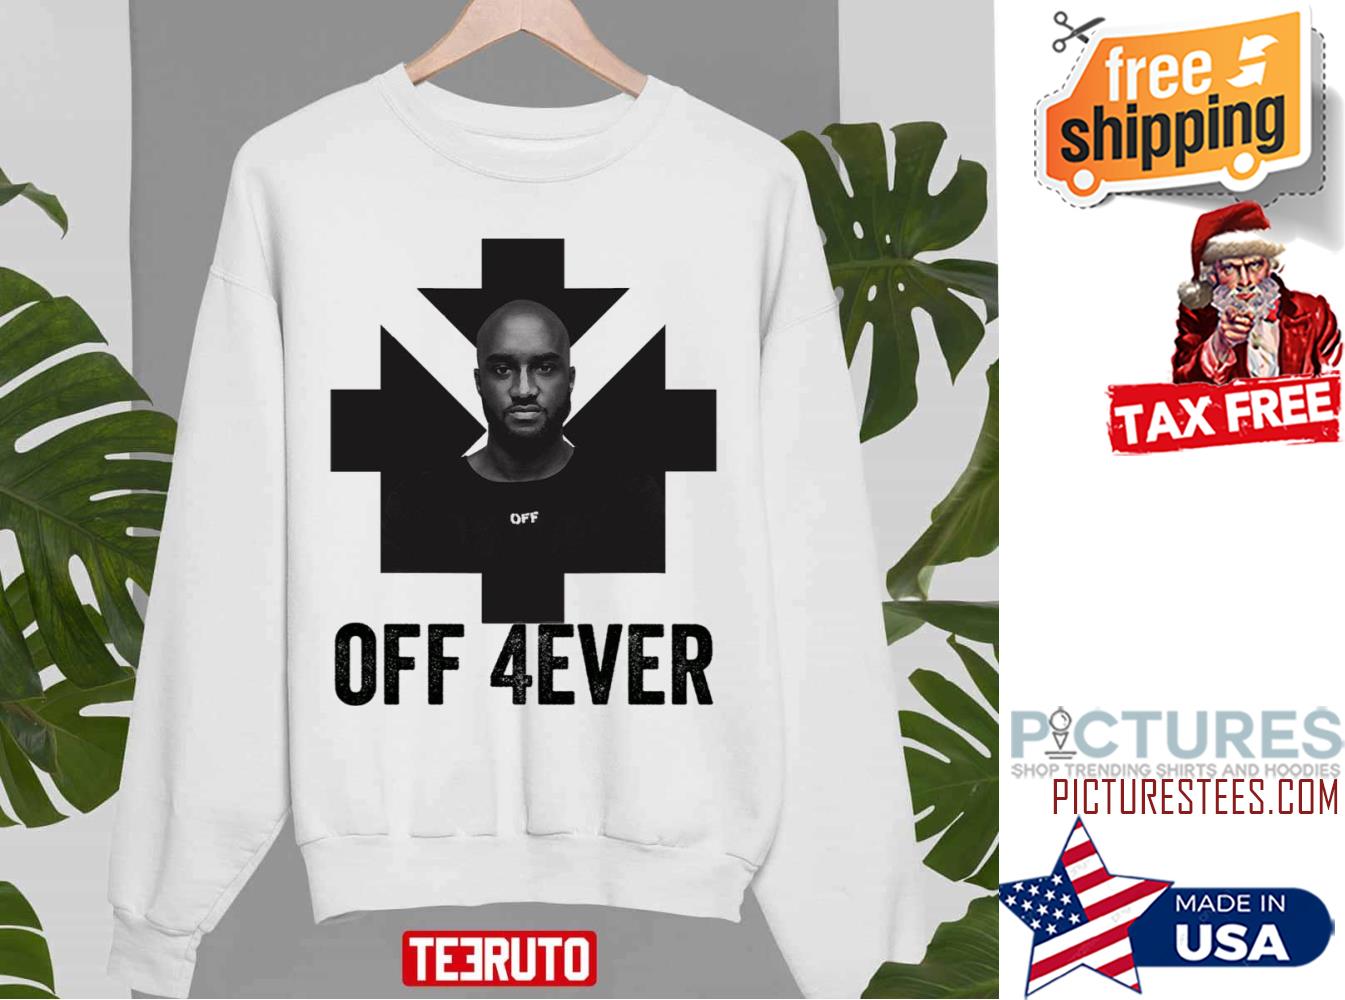 FREE shipping Rip Virgil Abloh Off 4Ever Shirt, Unisex tee, hoodie